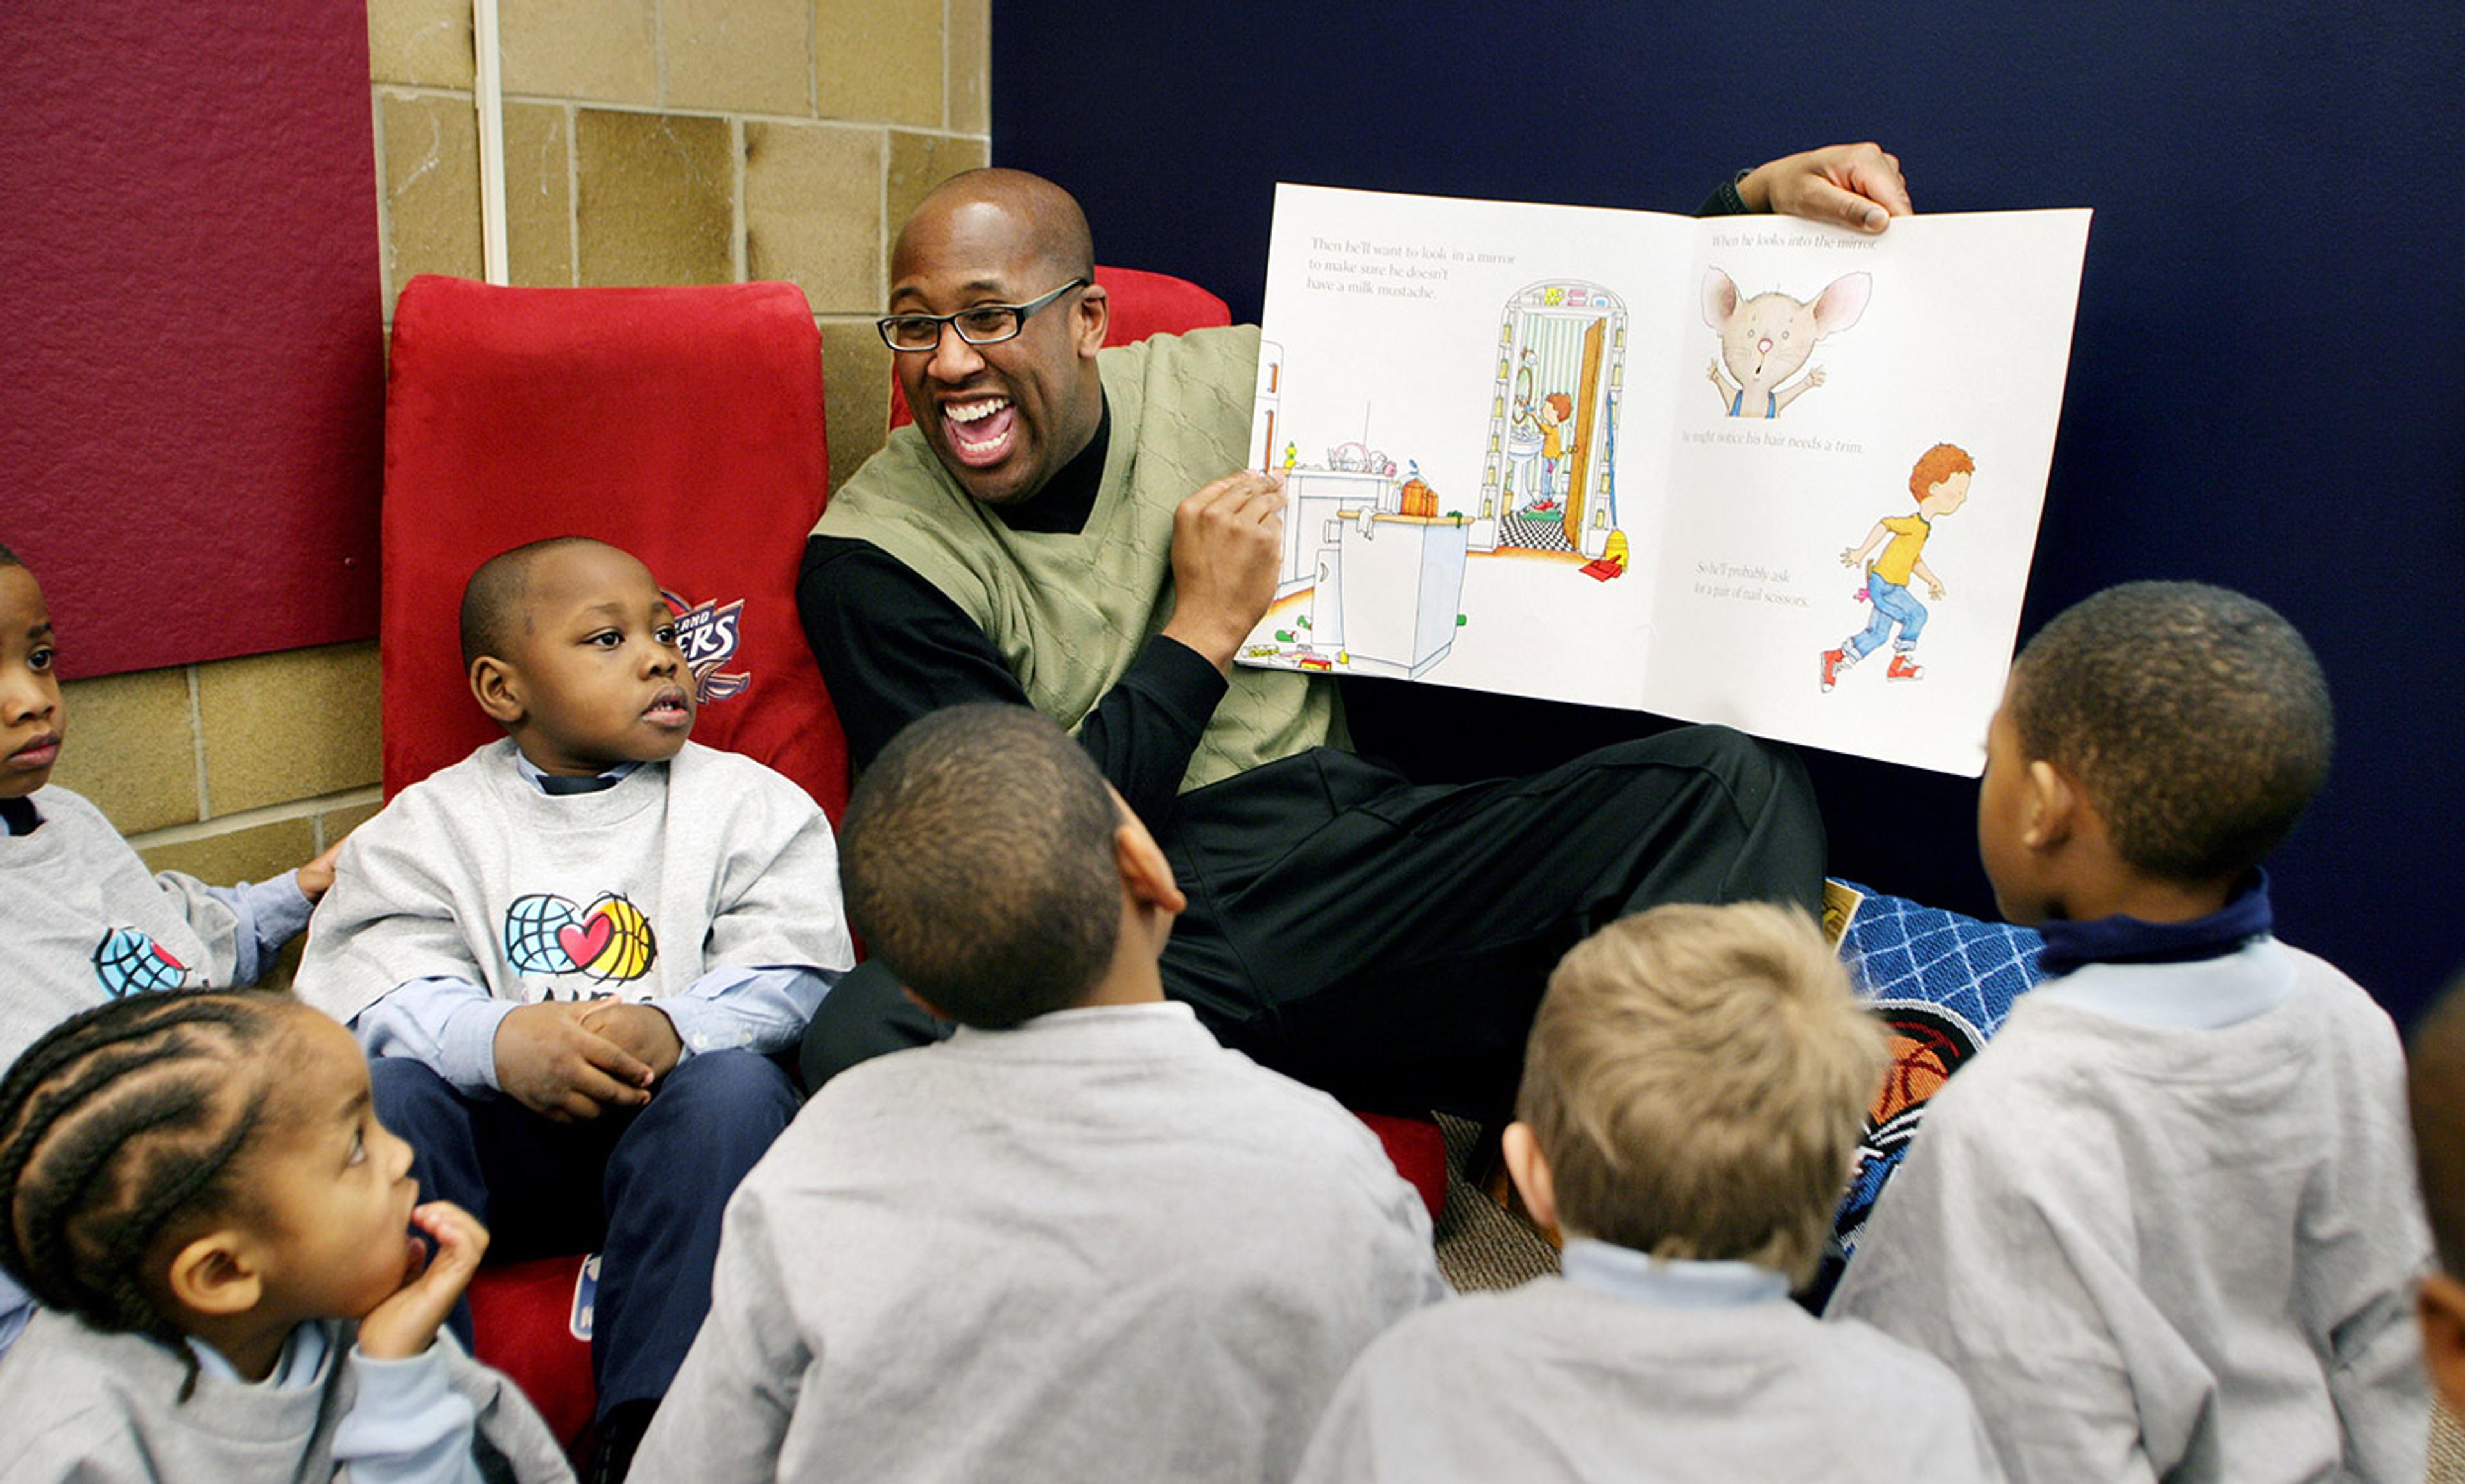 <p>Mike Brown, former head coach of the Cleveland Cavaliers, reads to children at the Cavaliers All-Star Library at the Kenneth Clement Boys Leadership Academy, 12 February 2008. <em>Photo by David Liam Kyle/Getty</em></p>